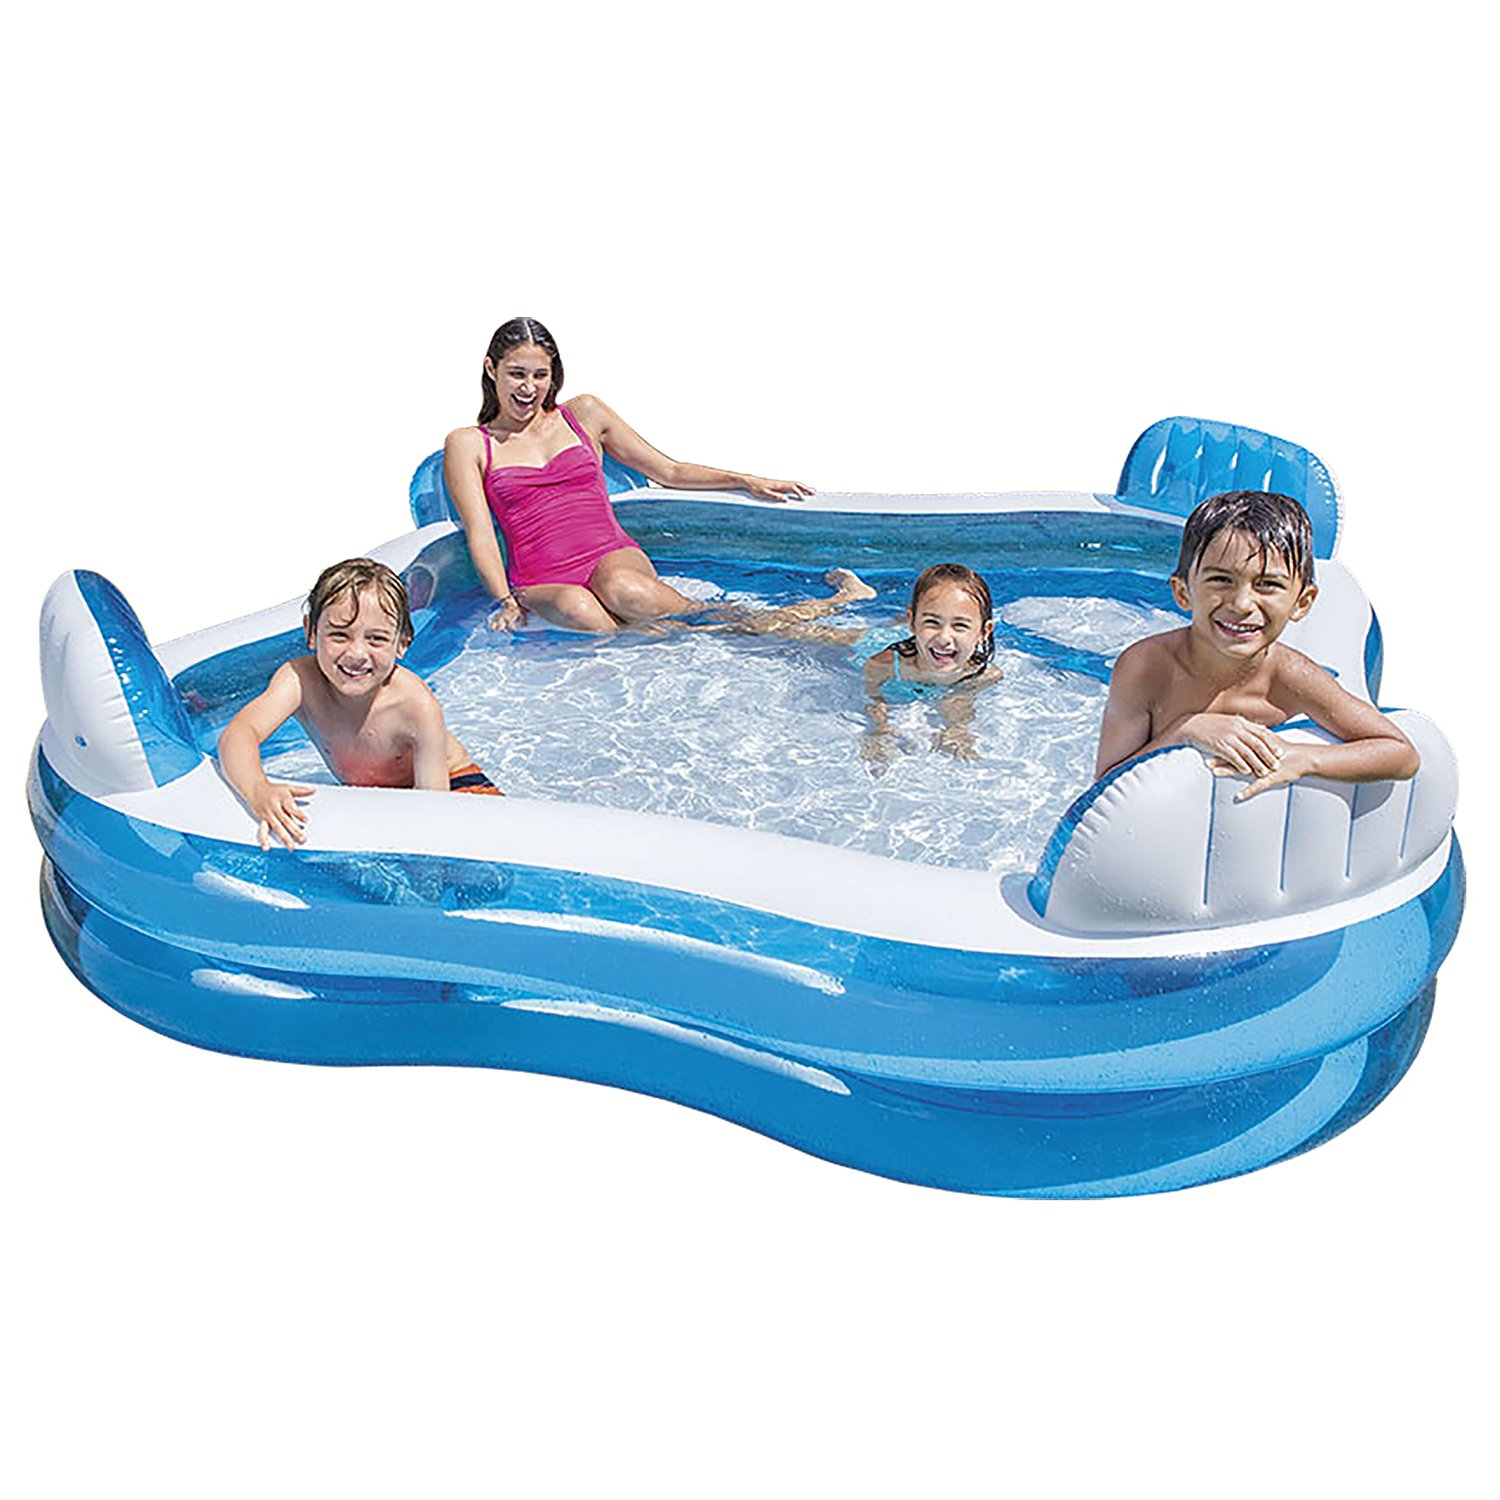 Intex Swim Center Family Lounge Inflatable Pool, 90" X 90" X 26" Ages 3+ - image 2 of 5